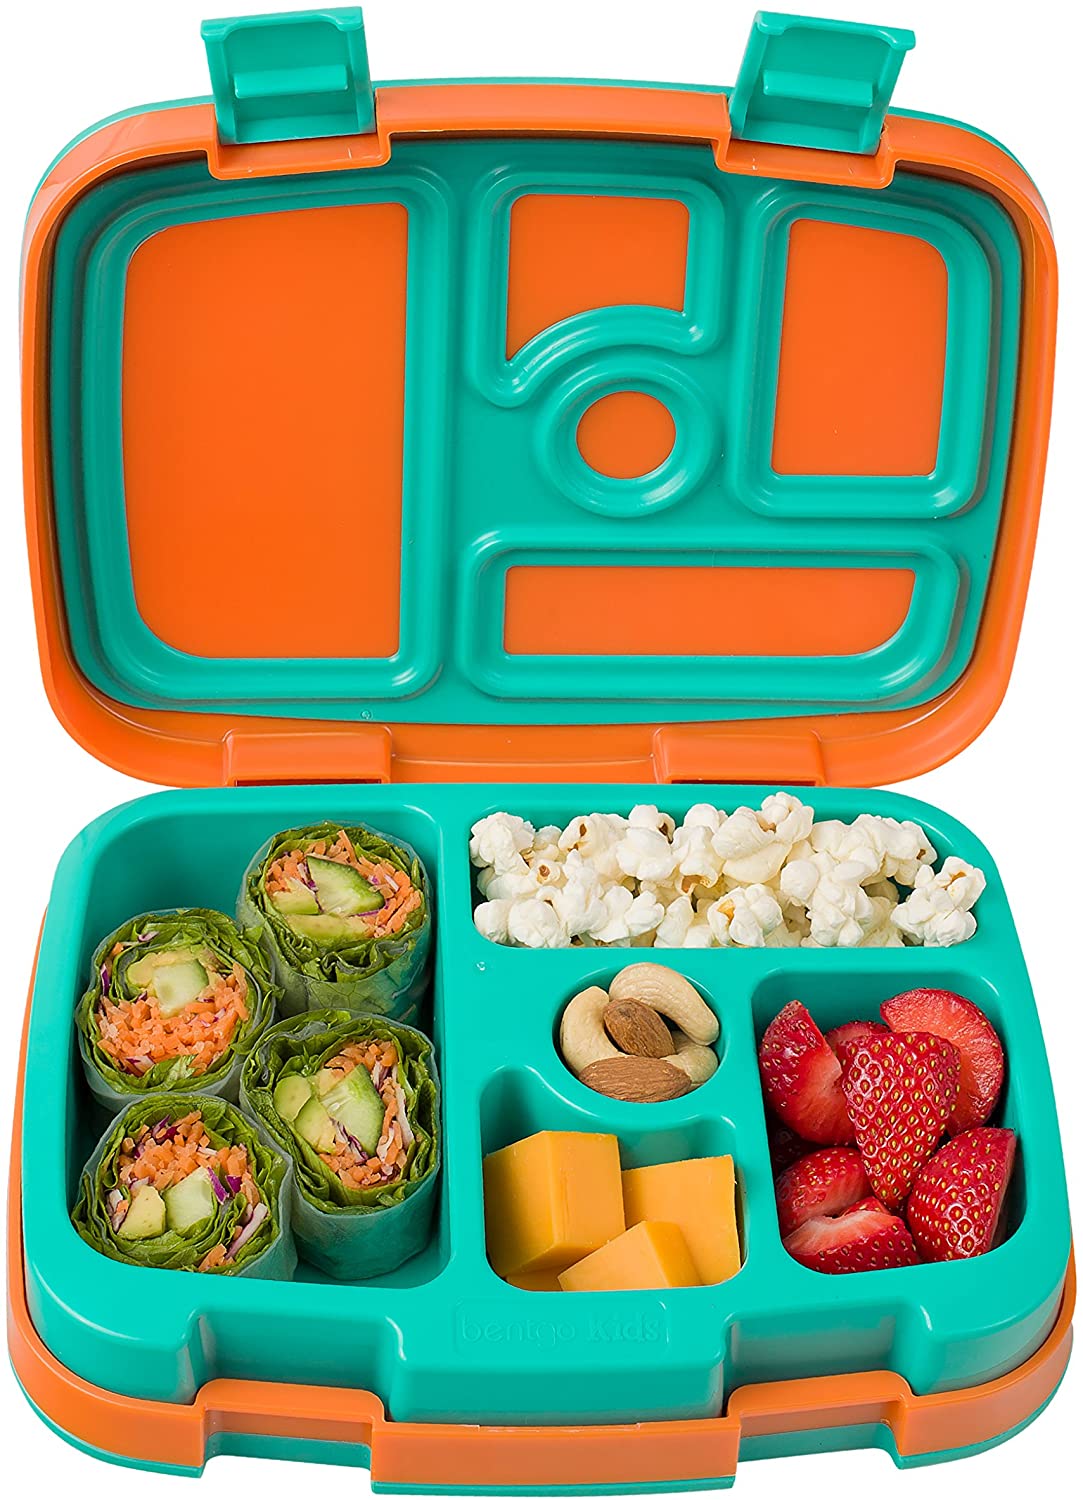 Bentgo Kids Brights Leak-Proof, 5-Compartment Bento-Style Kids Lunch Box